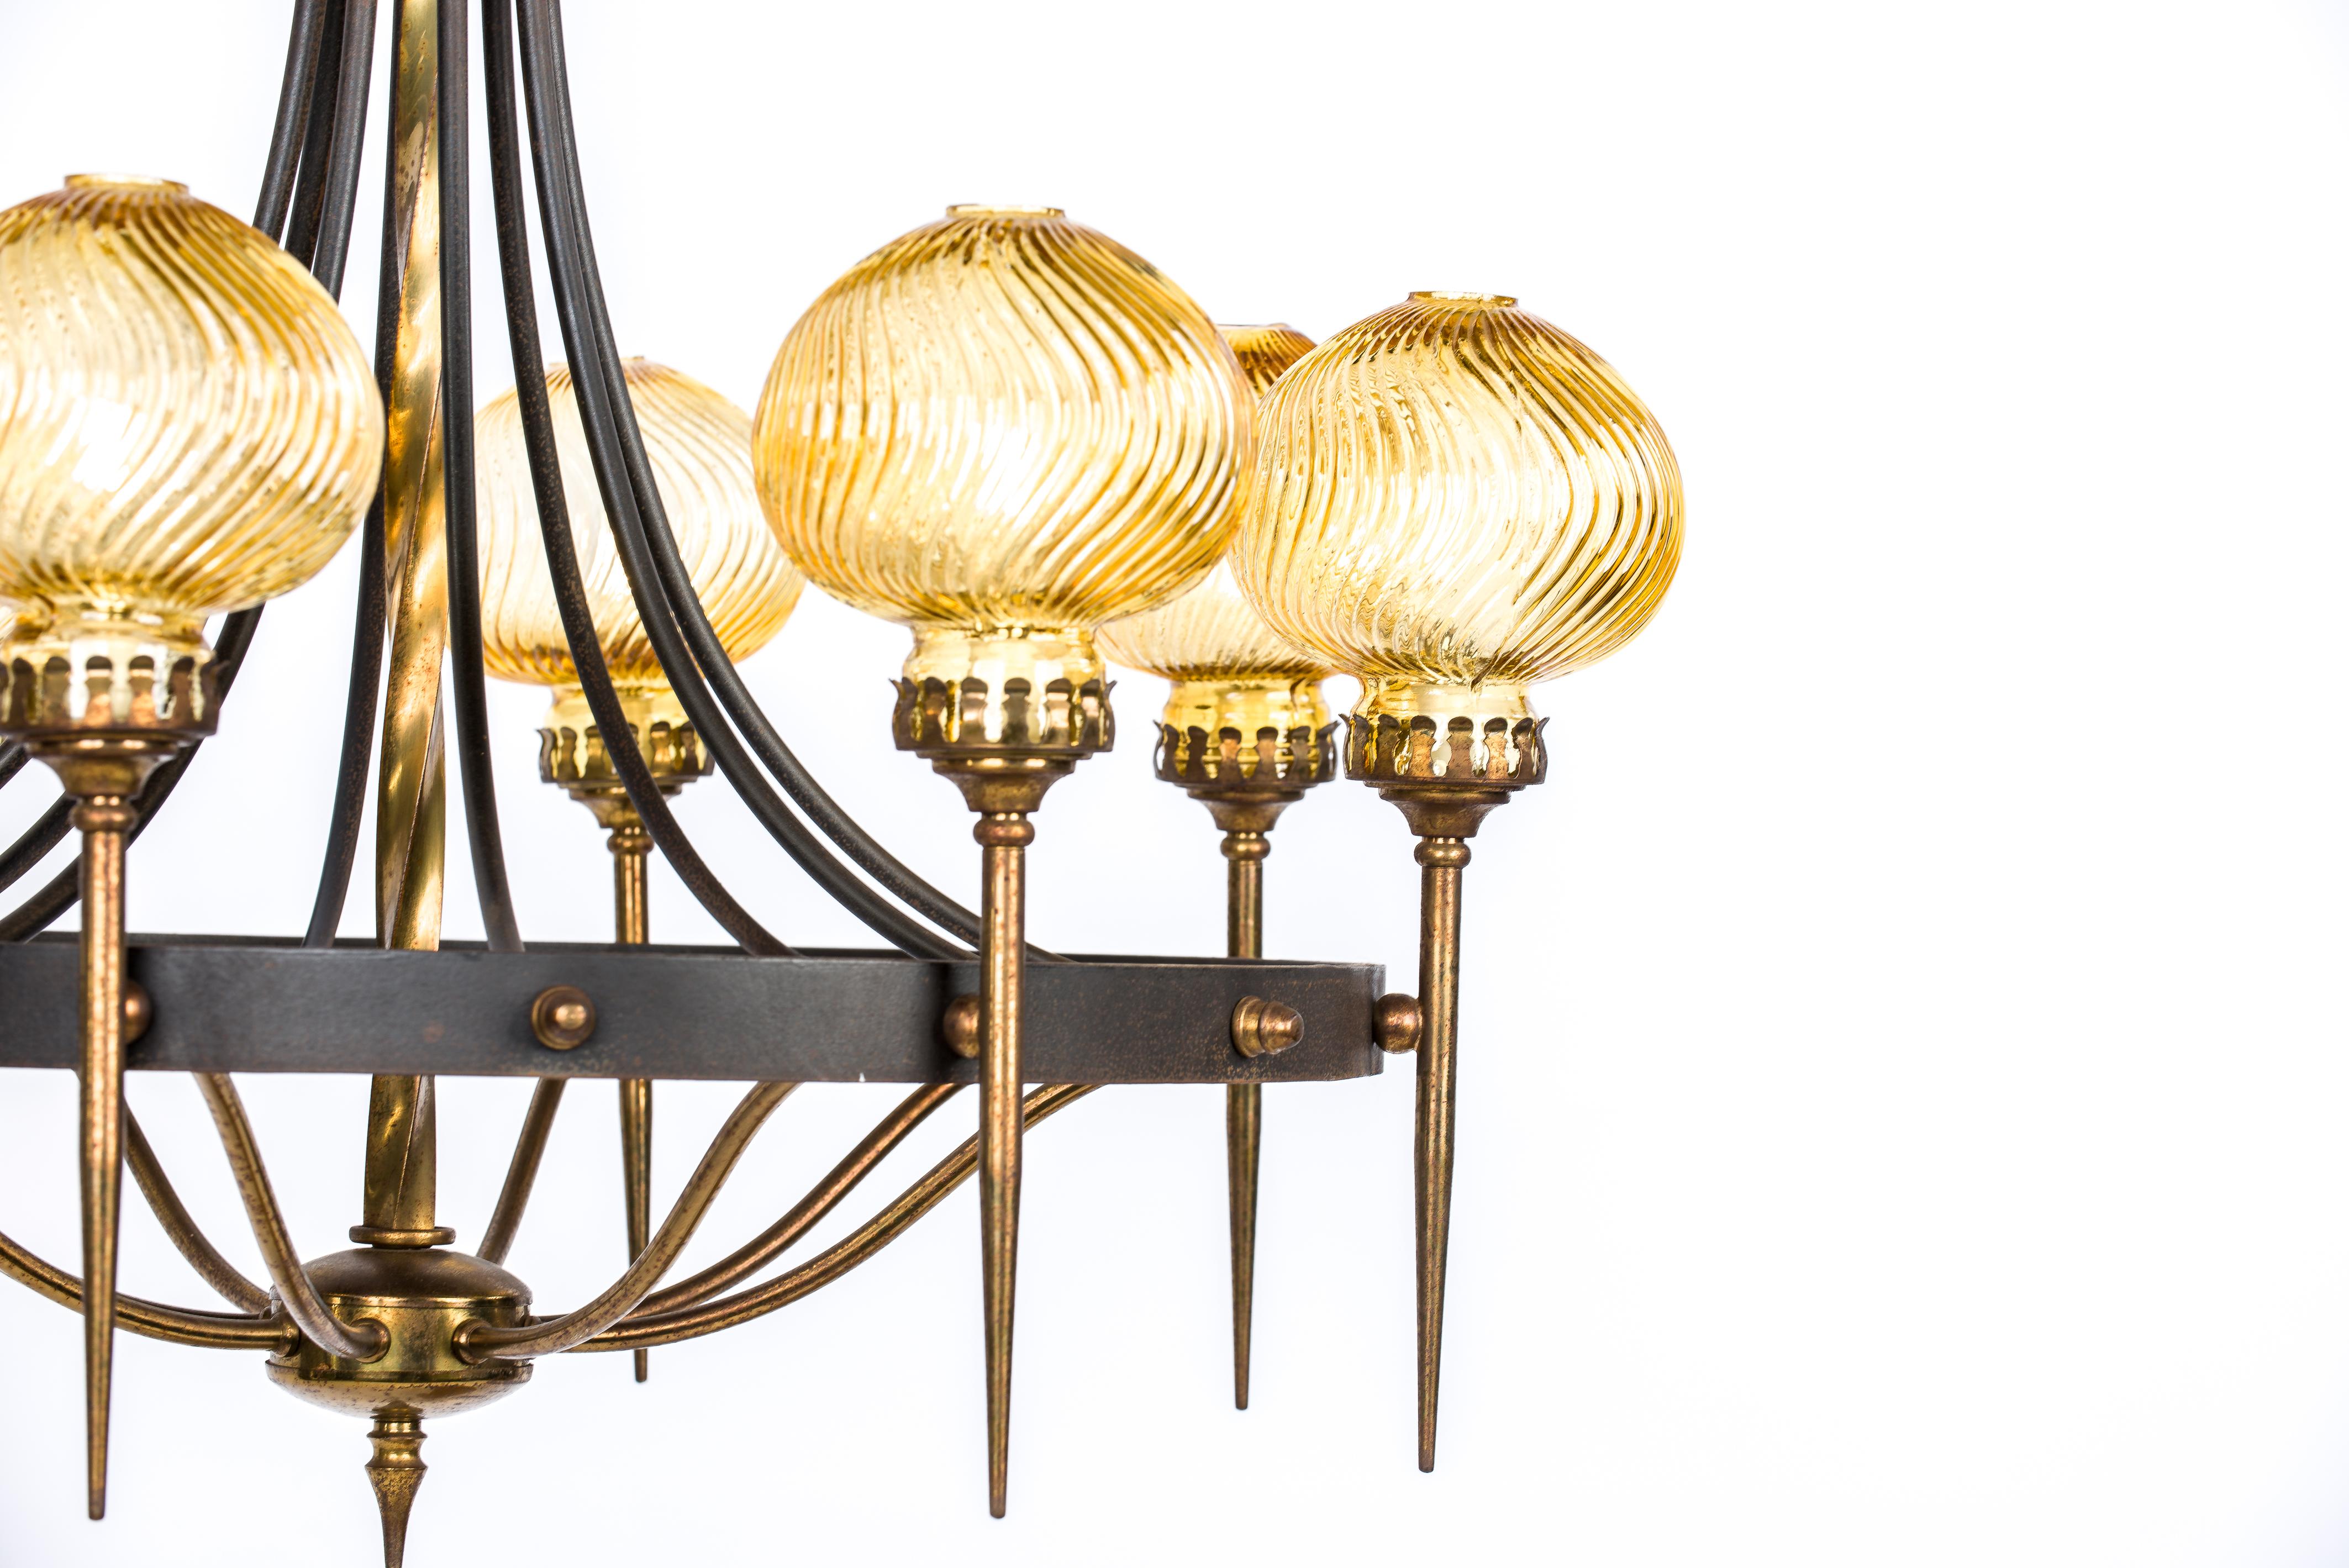 Forged Vintage Mid-20th Century French Iron and Brass Ring Chandelier with Torches